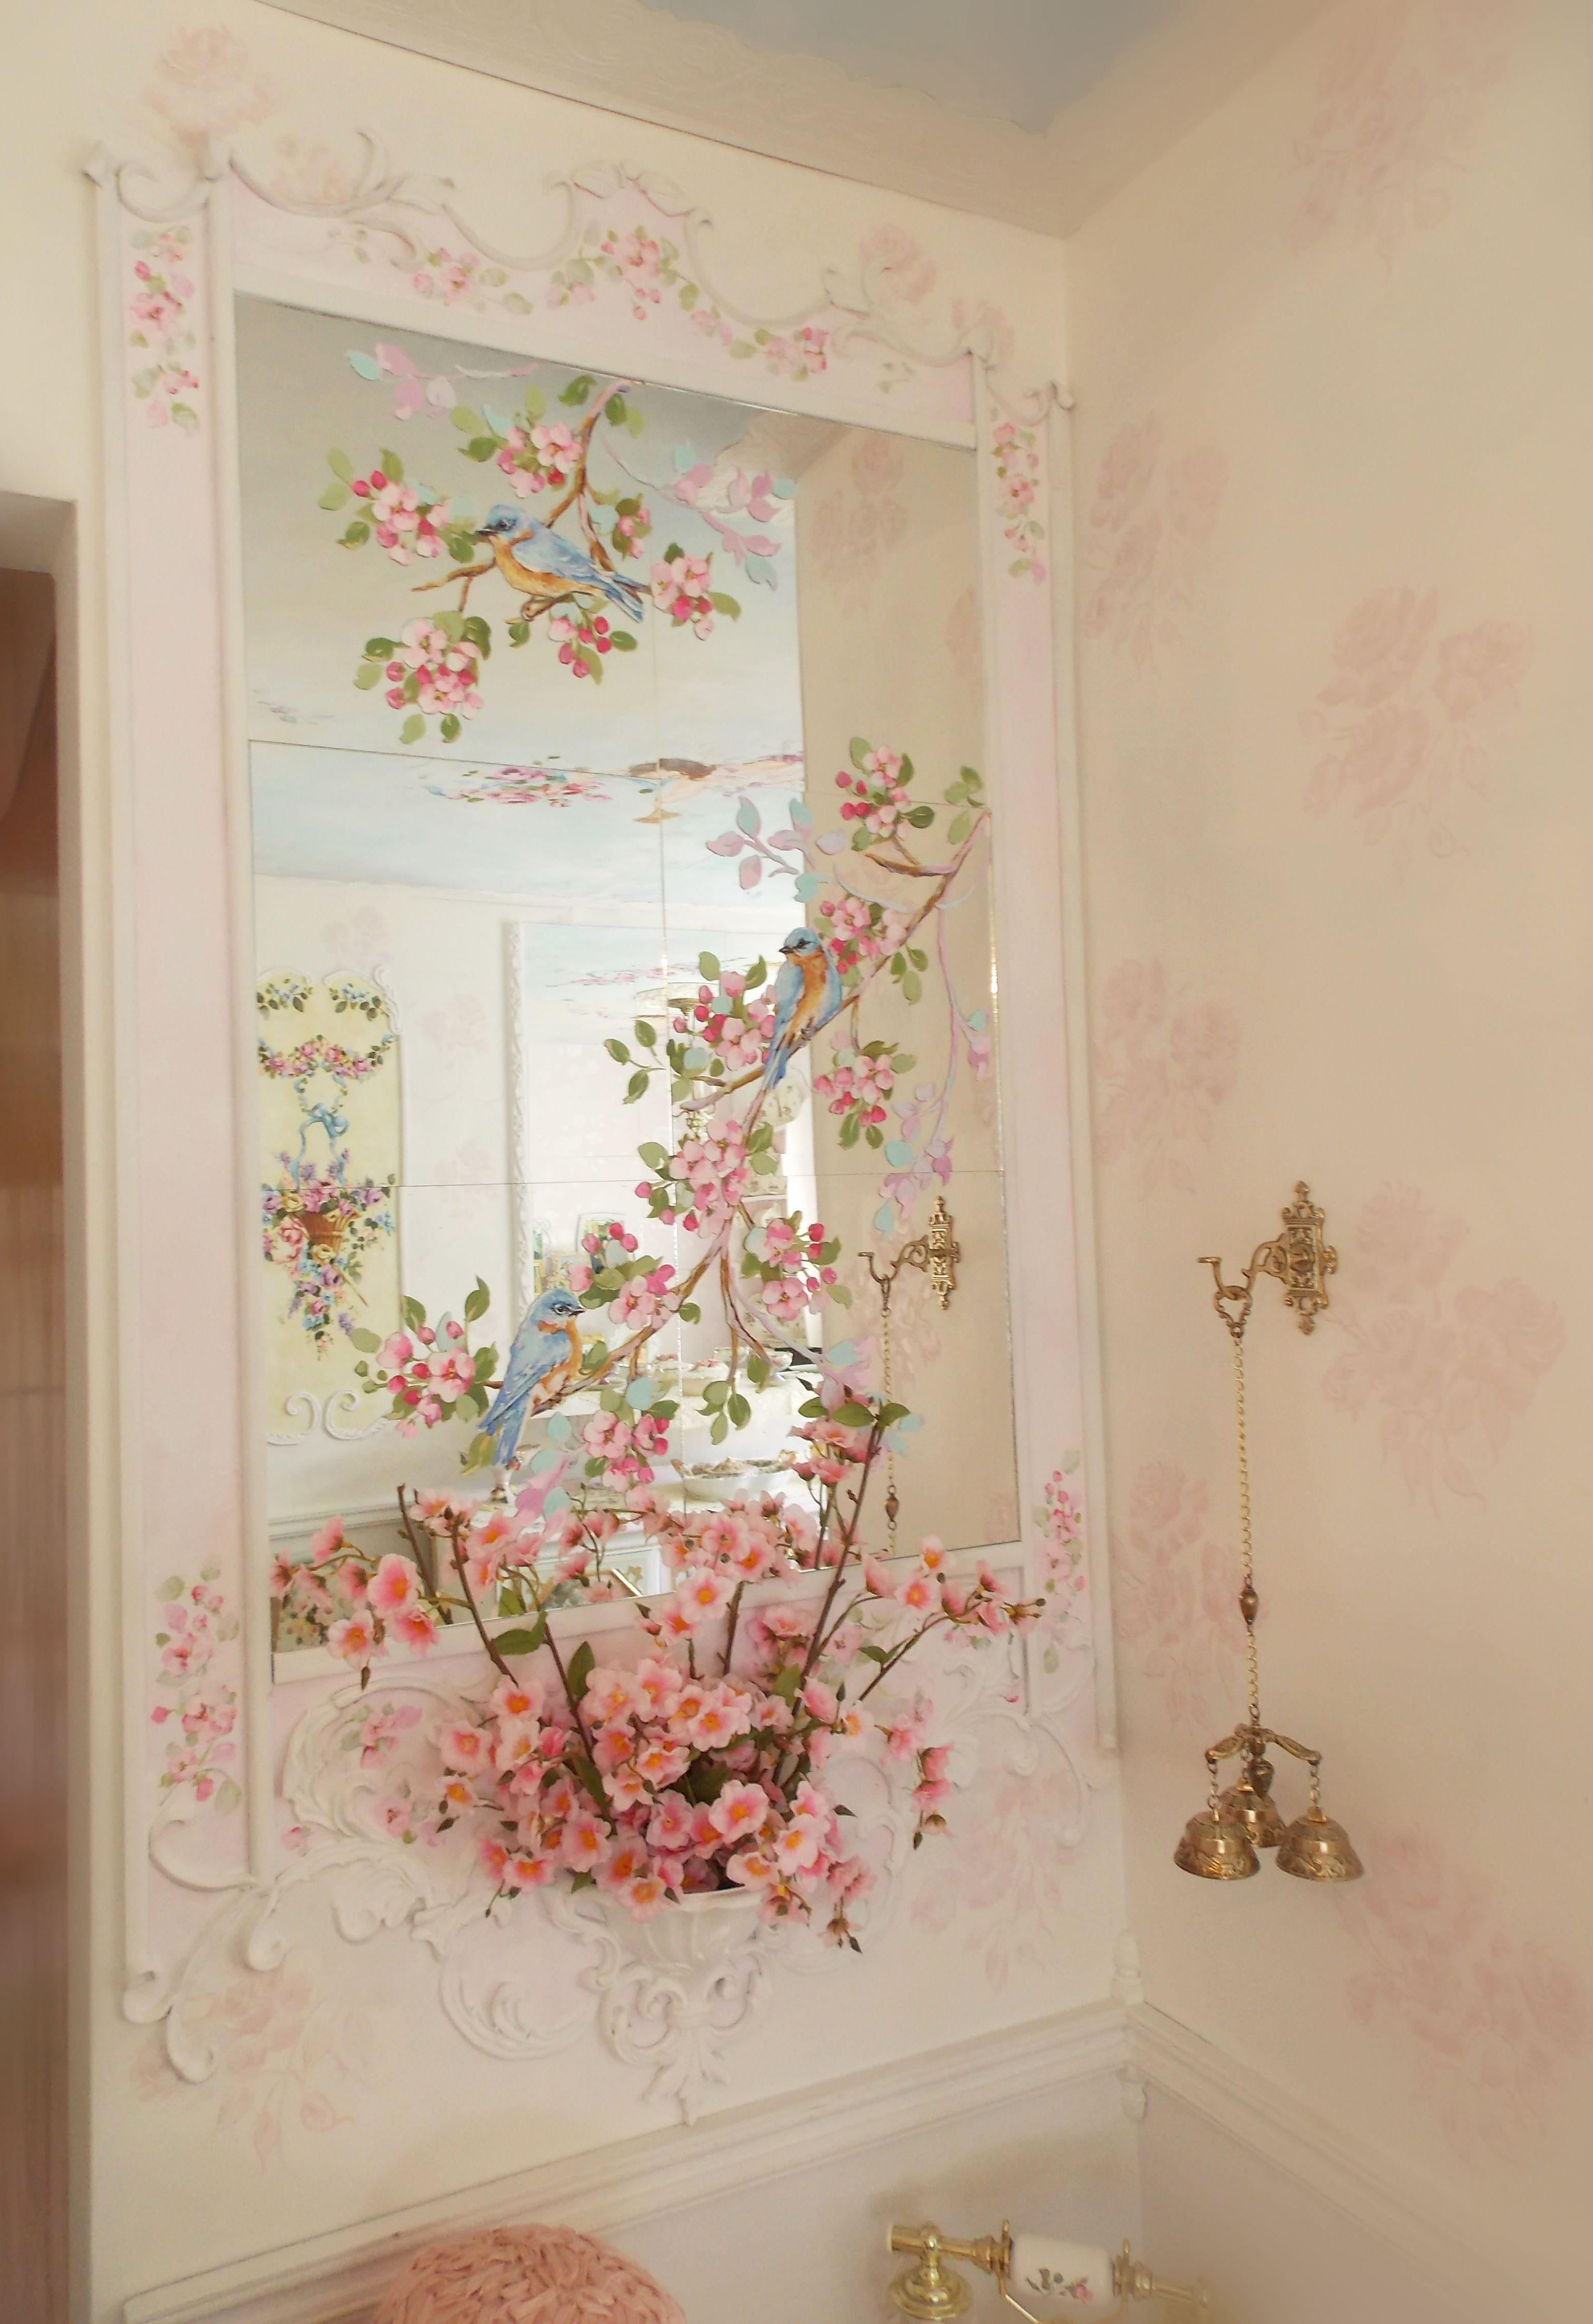 Jonny Petros Mirror Mural Art Rococo Painting Beautiful Living Intended For Shabby Chic Wall Mirror (View 15 of 15)